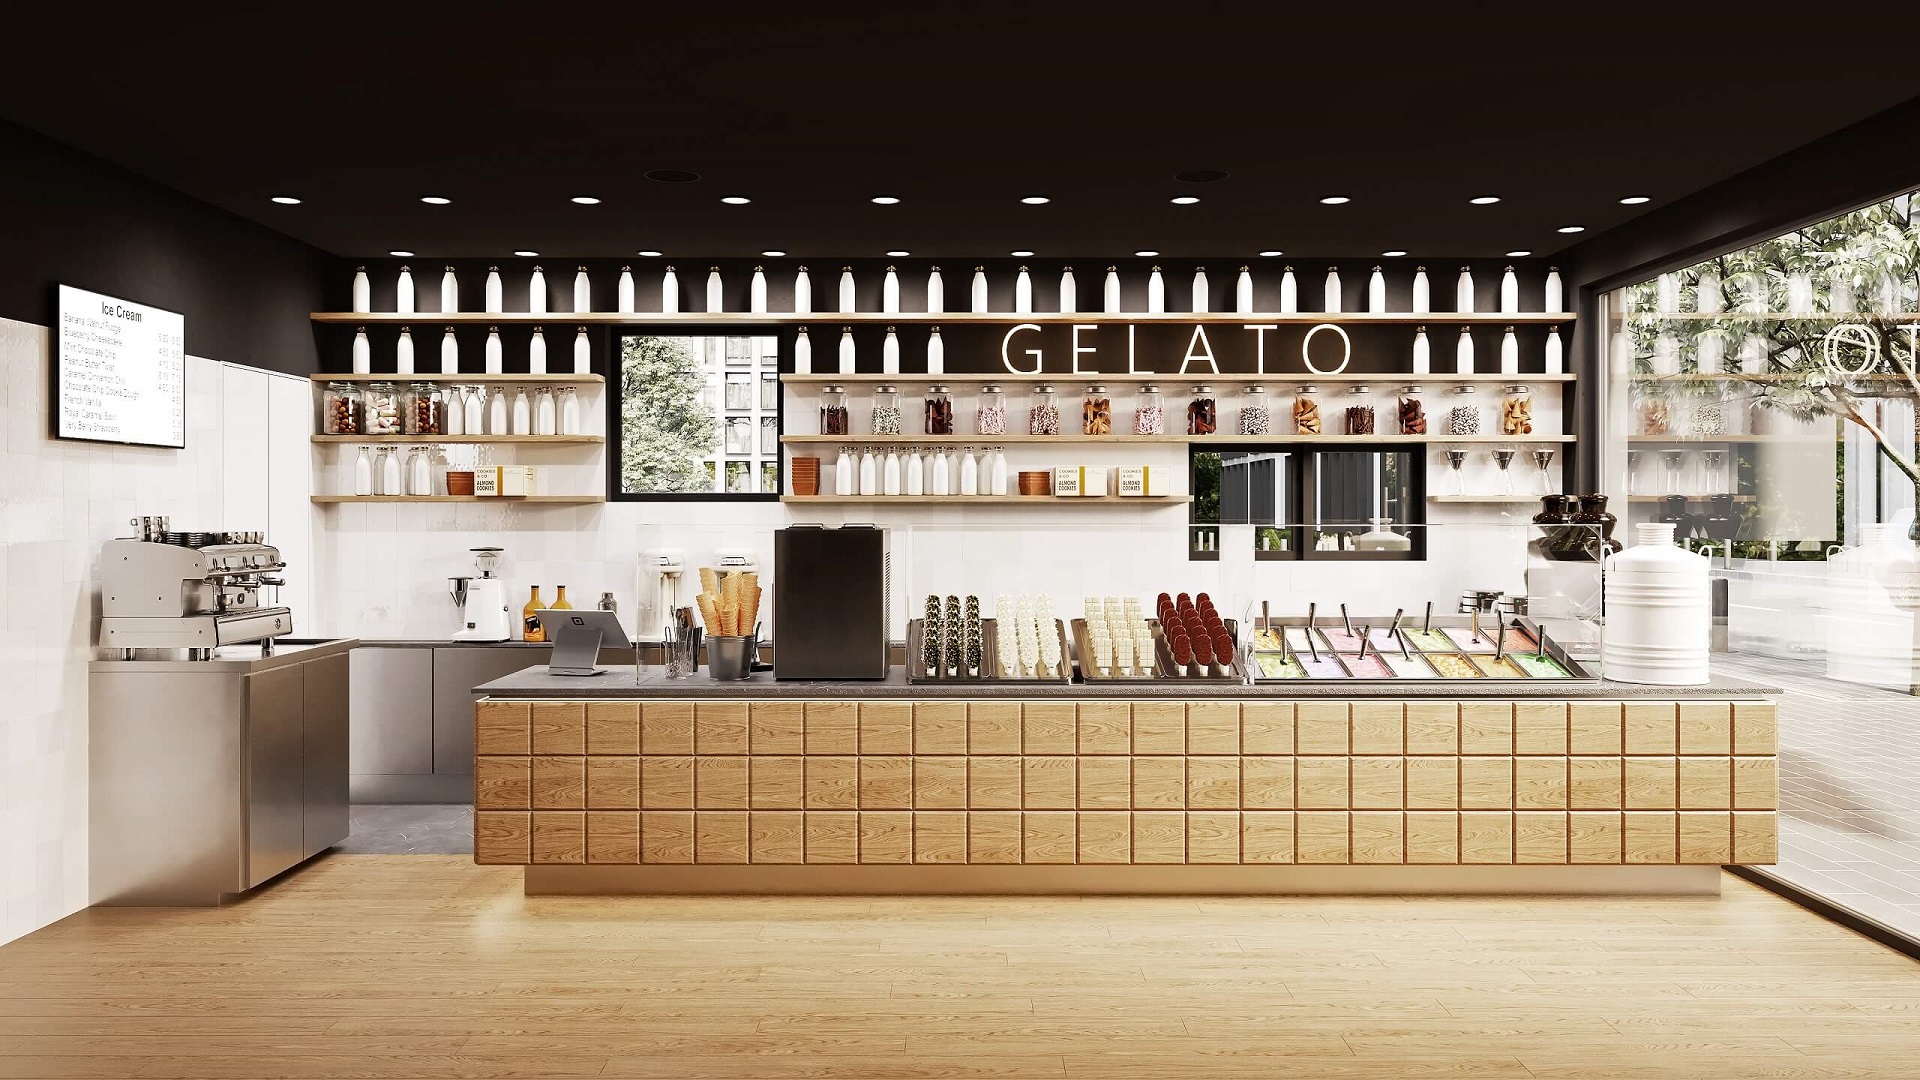 Commercial 3D Rendering of an Ice Cream Parlor